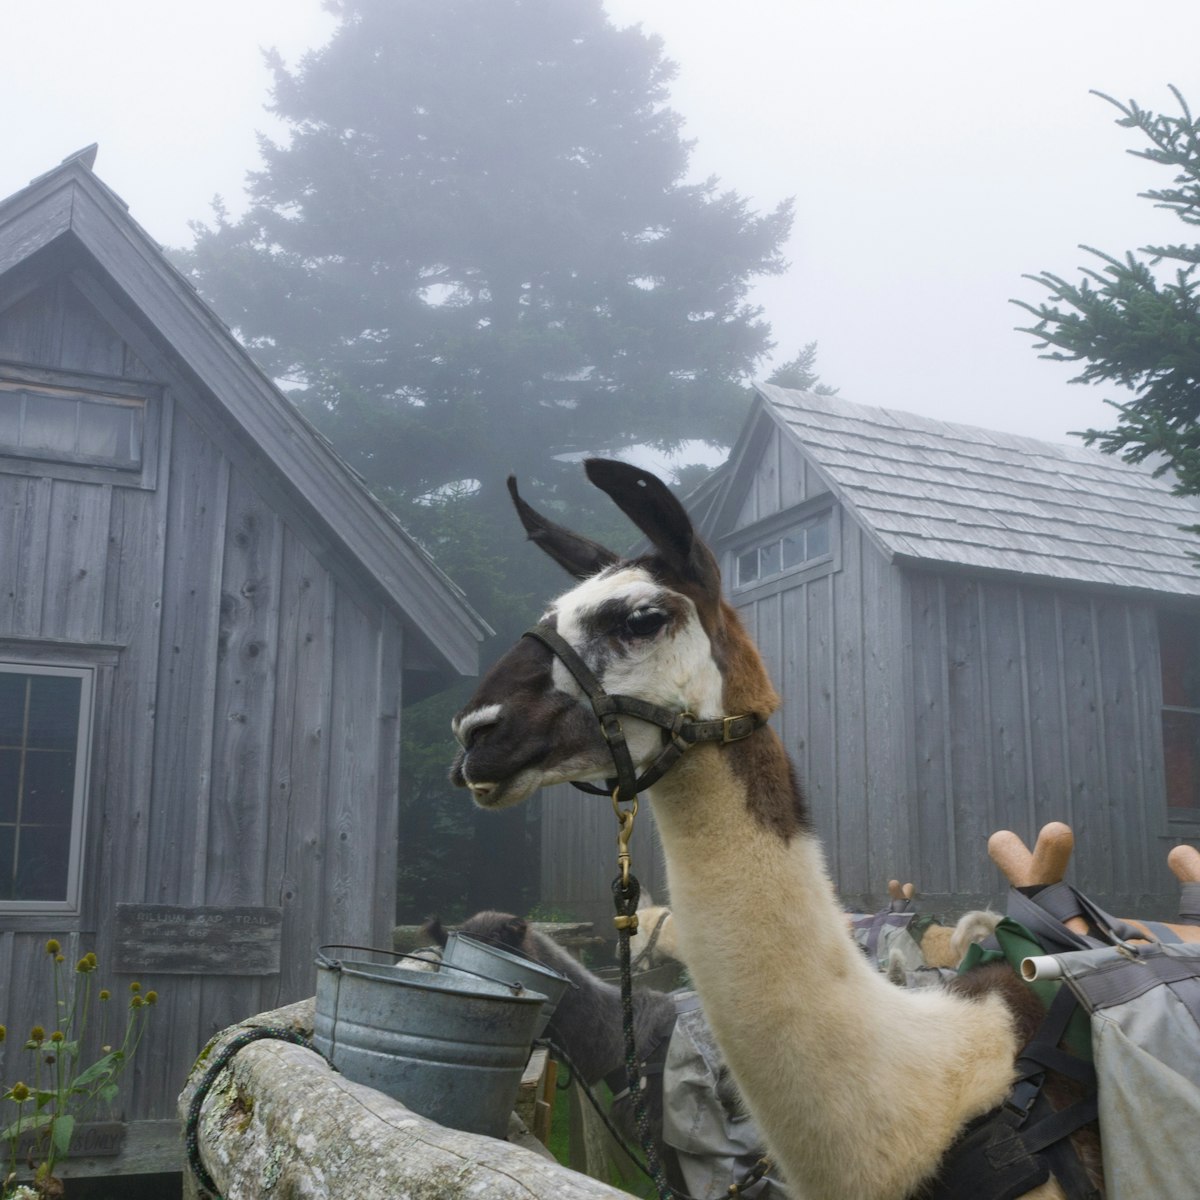 Llamas resting and eating after carrying supplies to the top of Mt. LeConte in the Great Smoky Mountains National Park